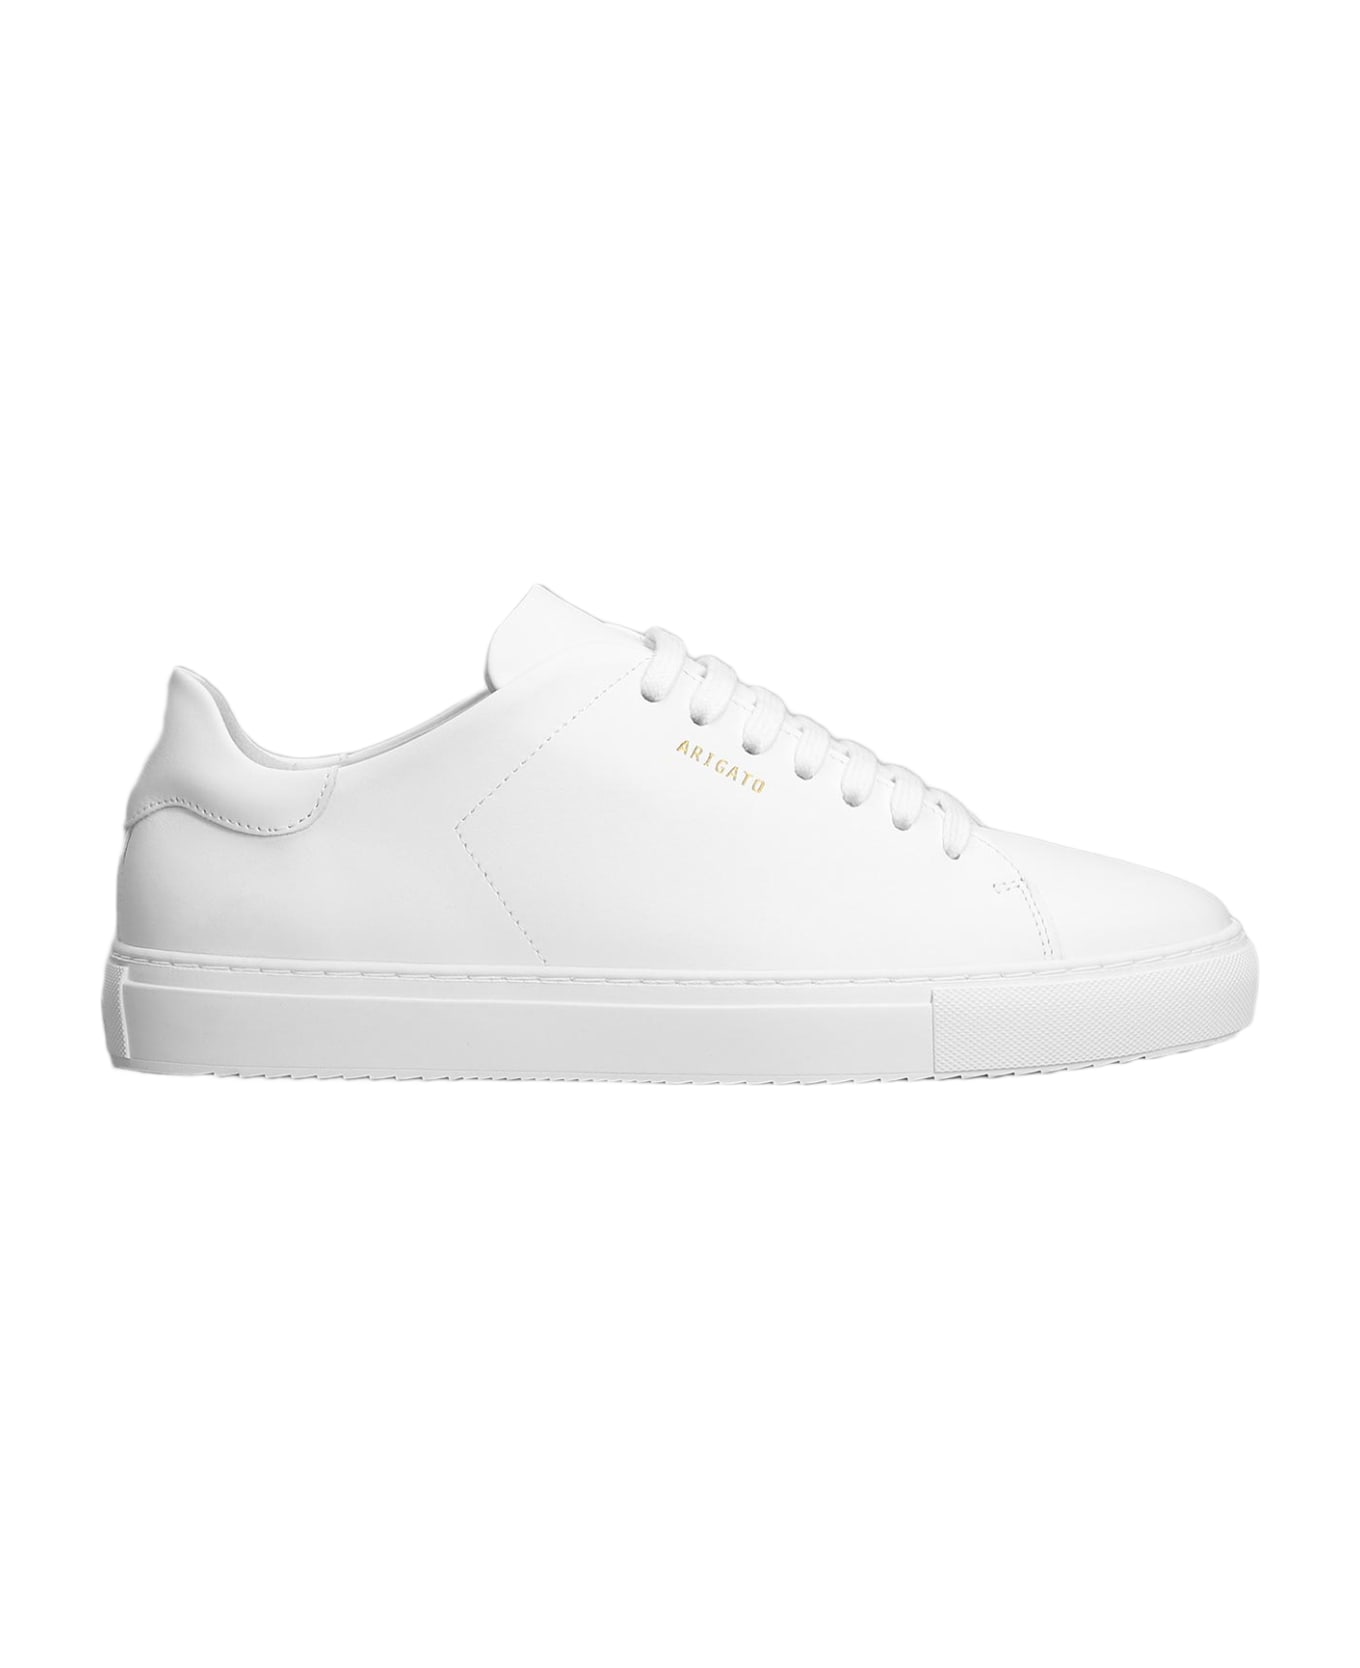 Axel Arigato Clean 90 Sneakers In White Leather - Bianco スニーカー